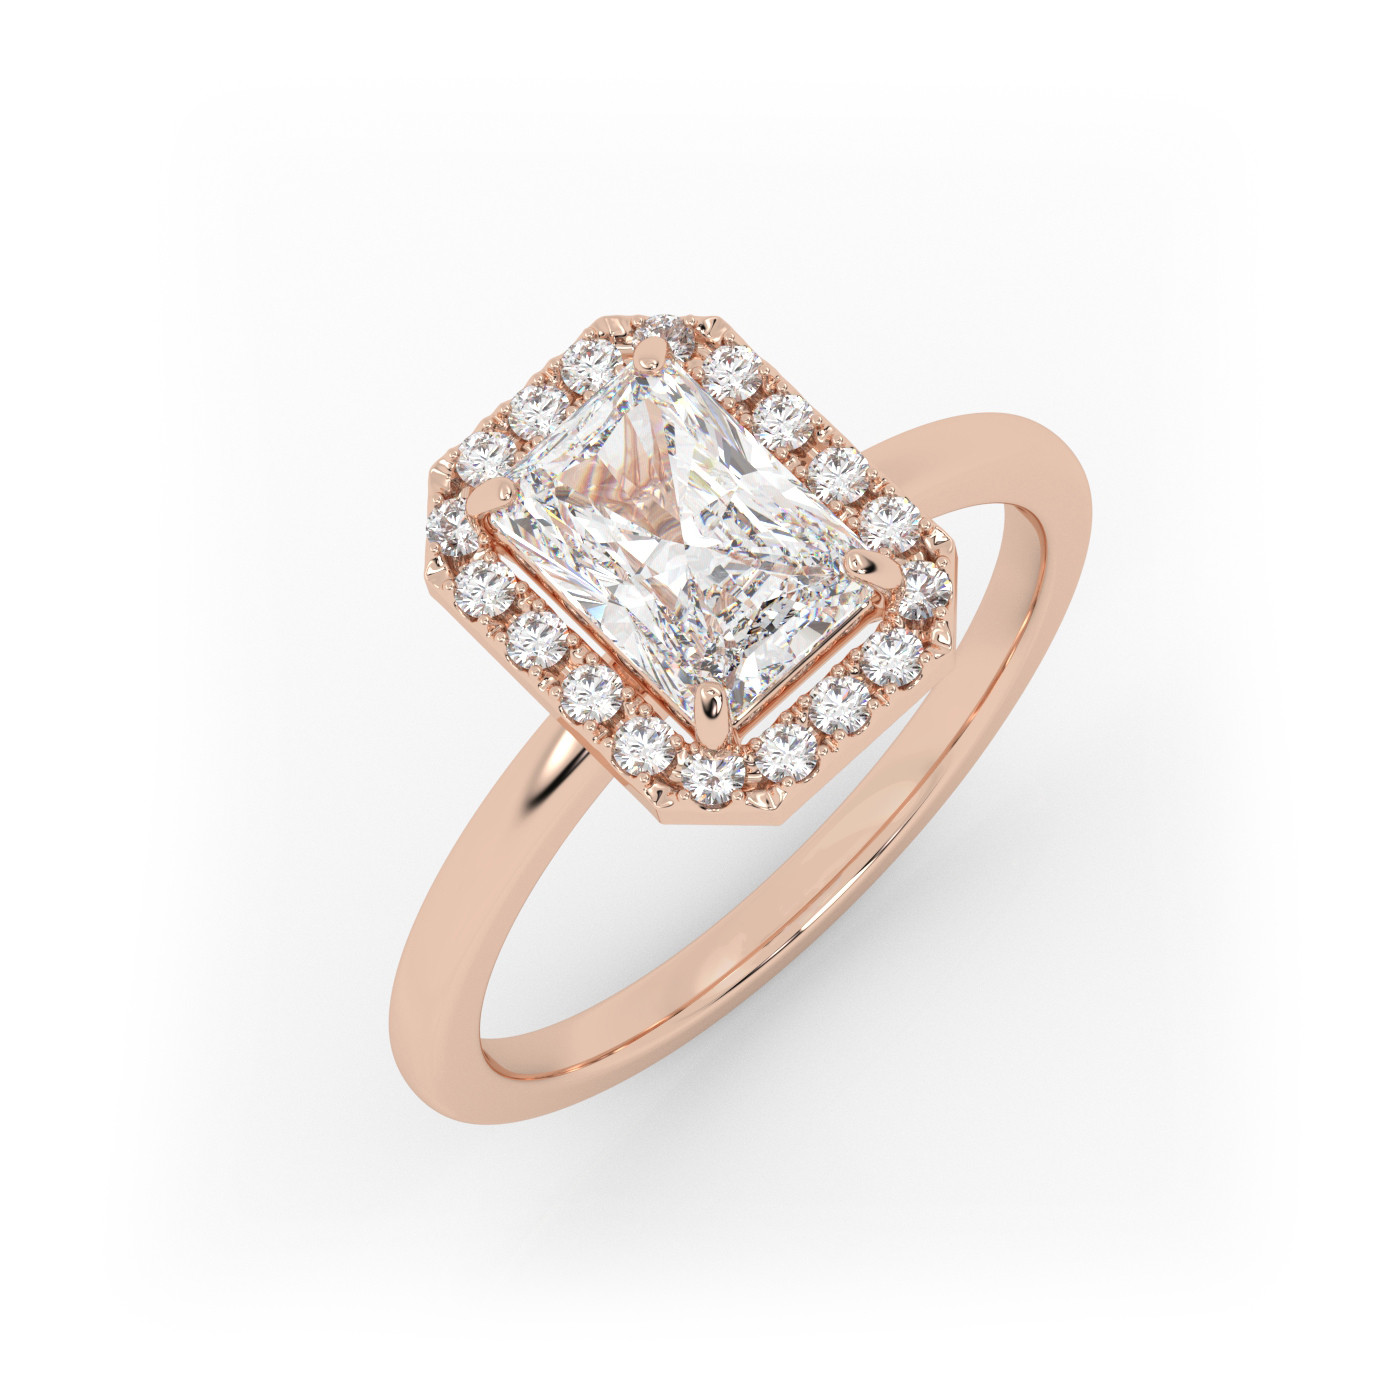 18K ROSE GOLD Radiant Diamond Cut Engagement Ring with Halo Style